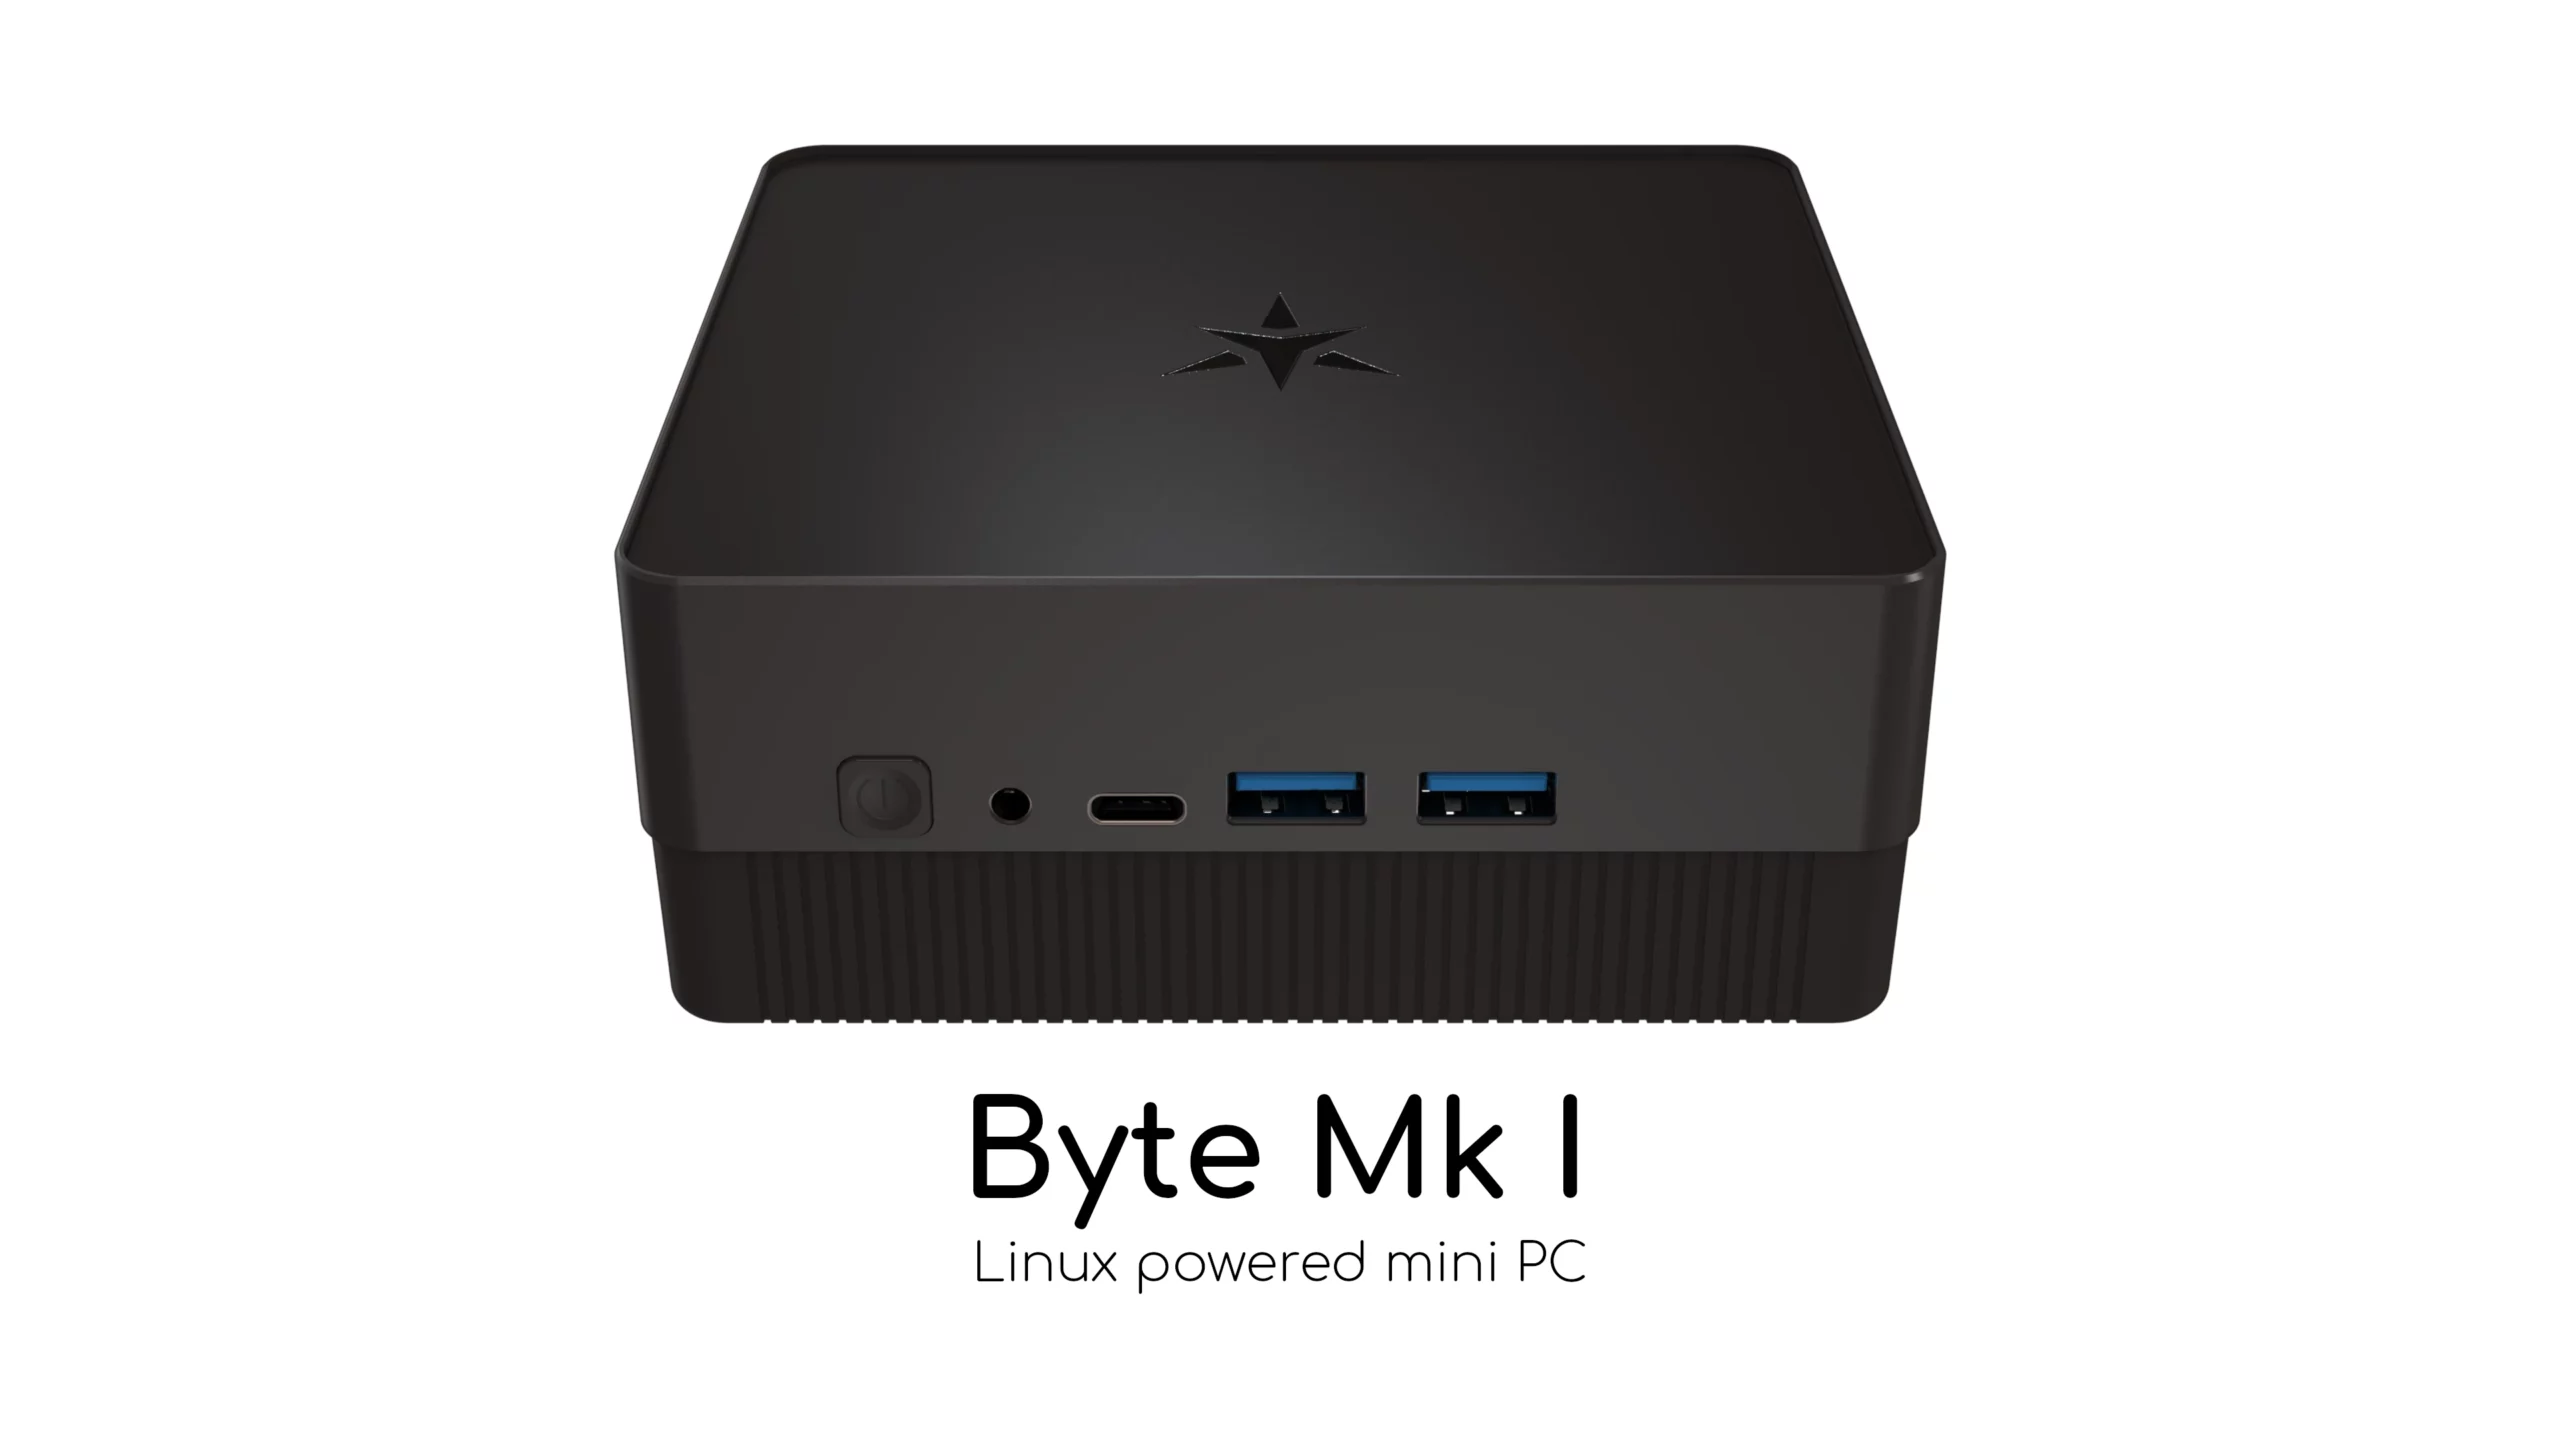 Star Labs Unveil Their First AMD-Powered Mini Linux PC with Coreboot Support